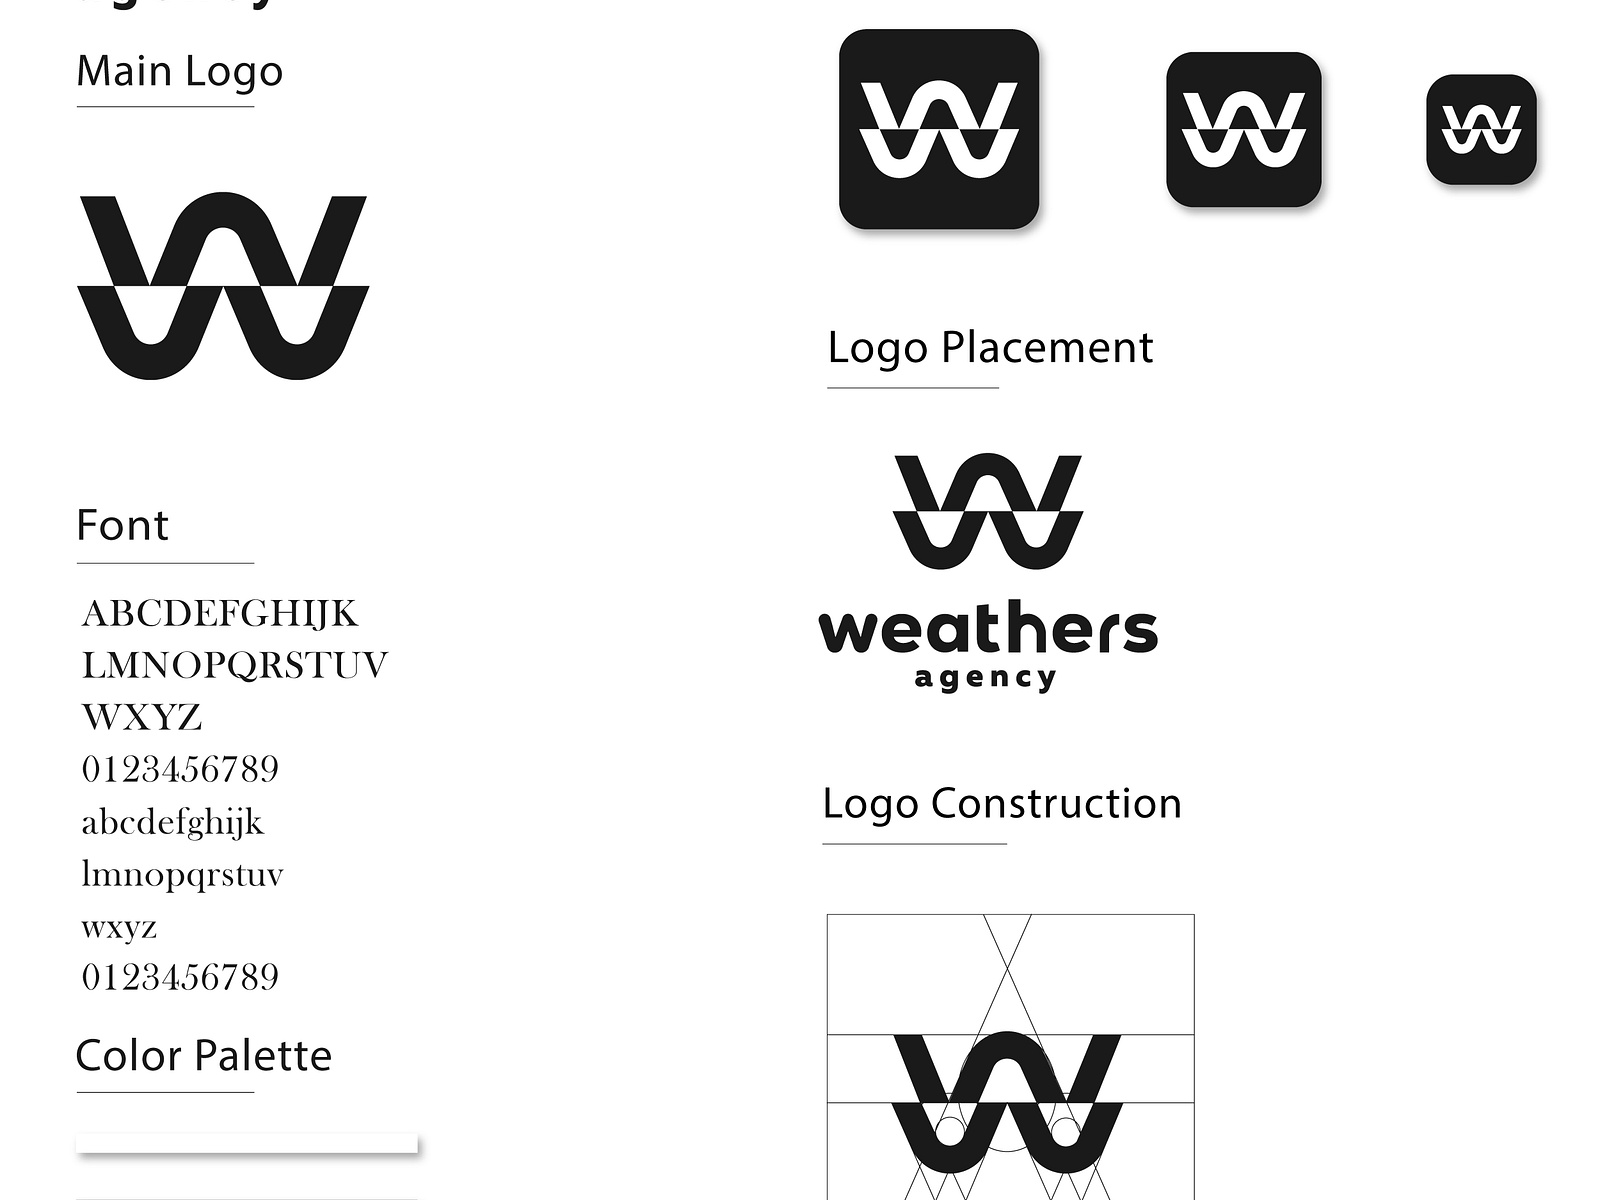 Minimal and simple weather logo design by Zakariaqt on Dribbble